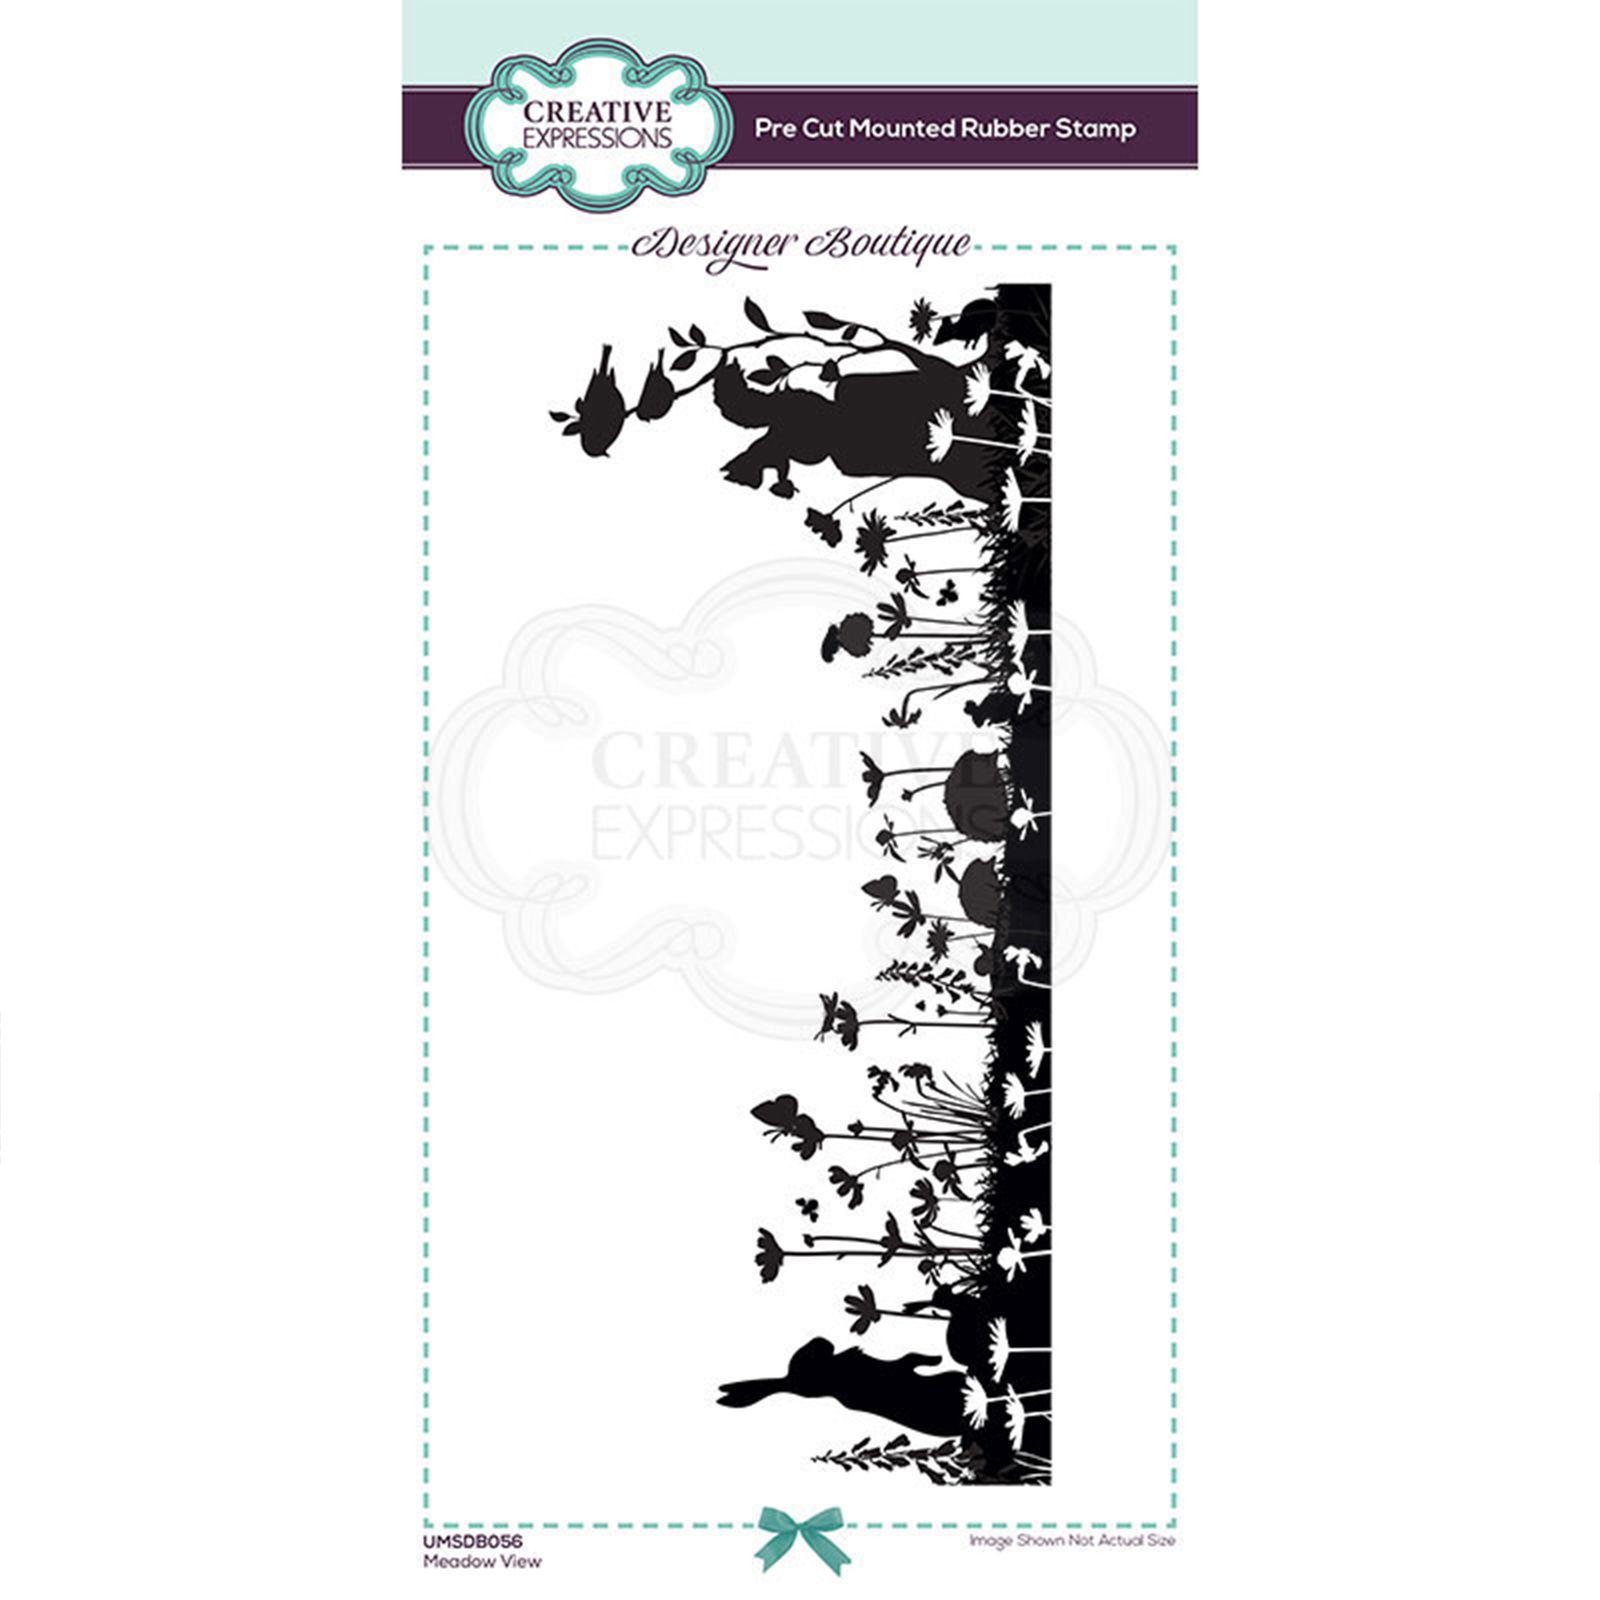 Creative Expressions • Designer boutique collection Pre cut rubber stamp Meadow view